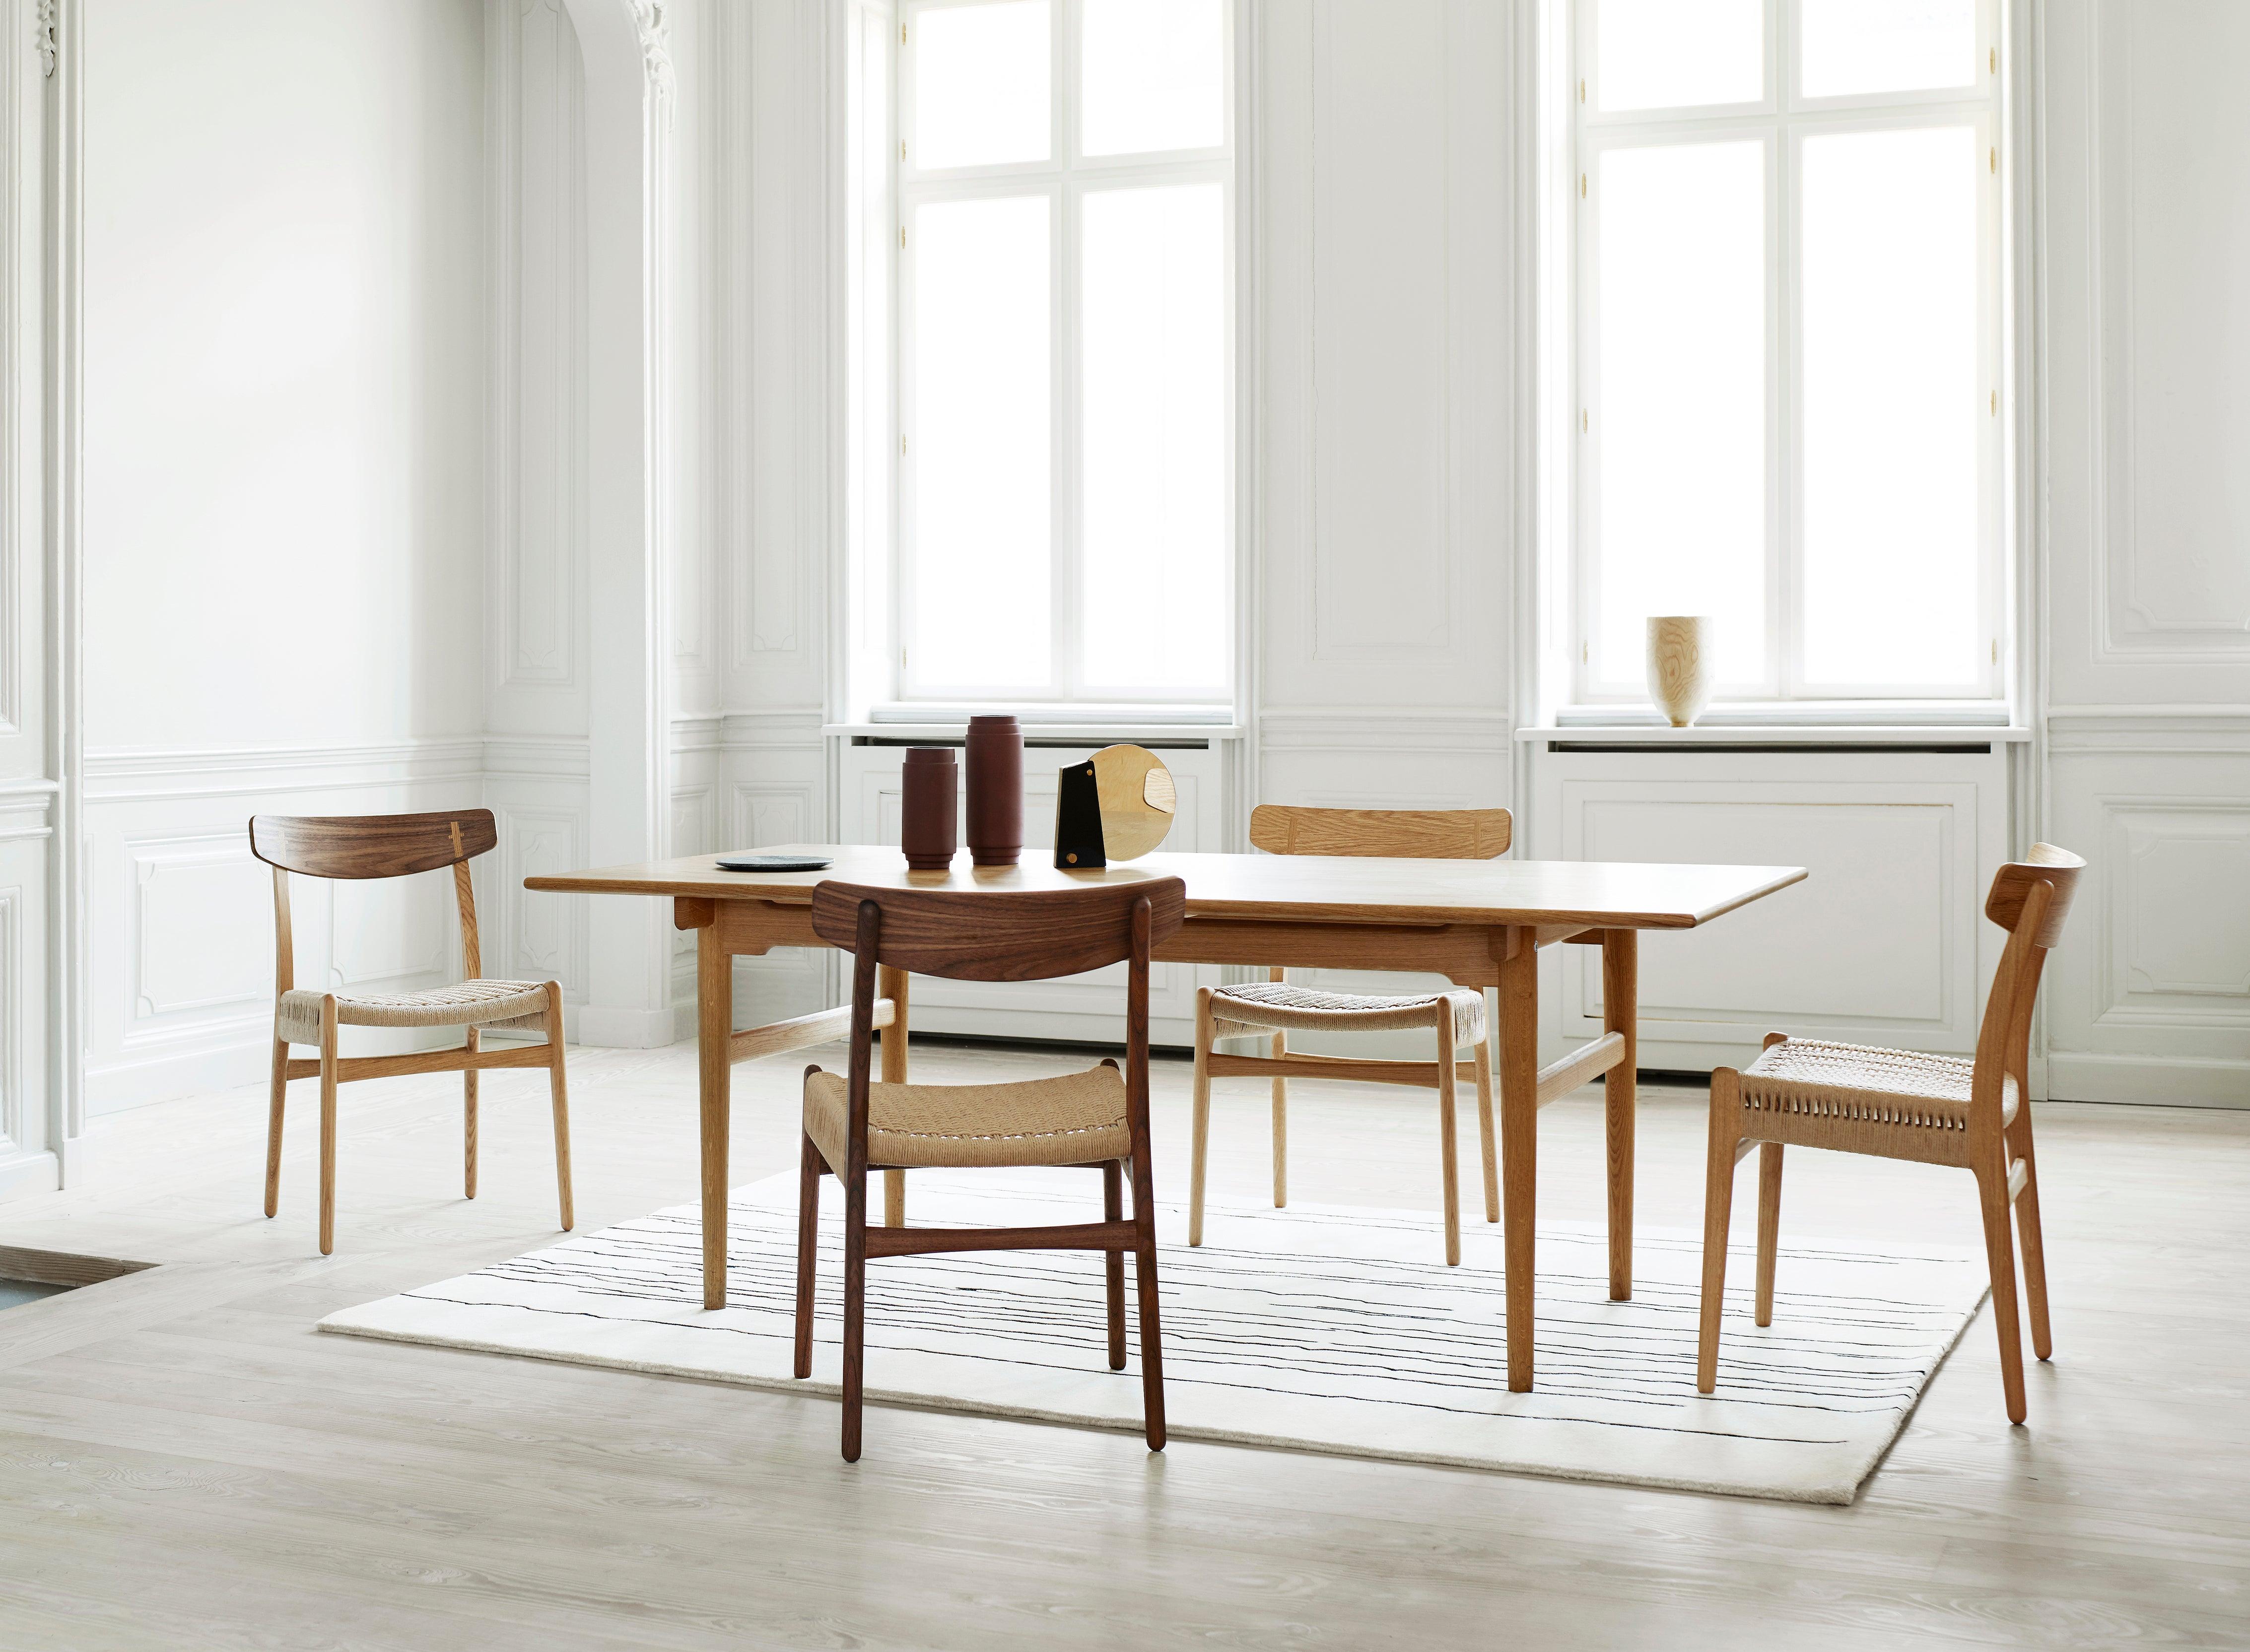 Contemporary CH23 Dining Chair in Oak Soap with Natural Papercord Seat by Hans J. Wegner